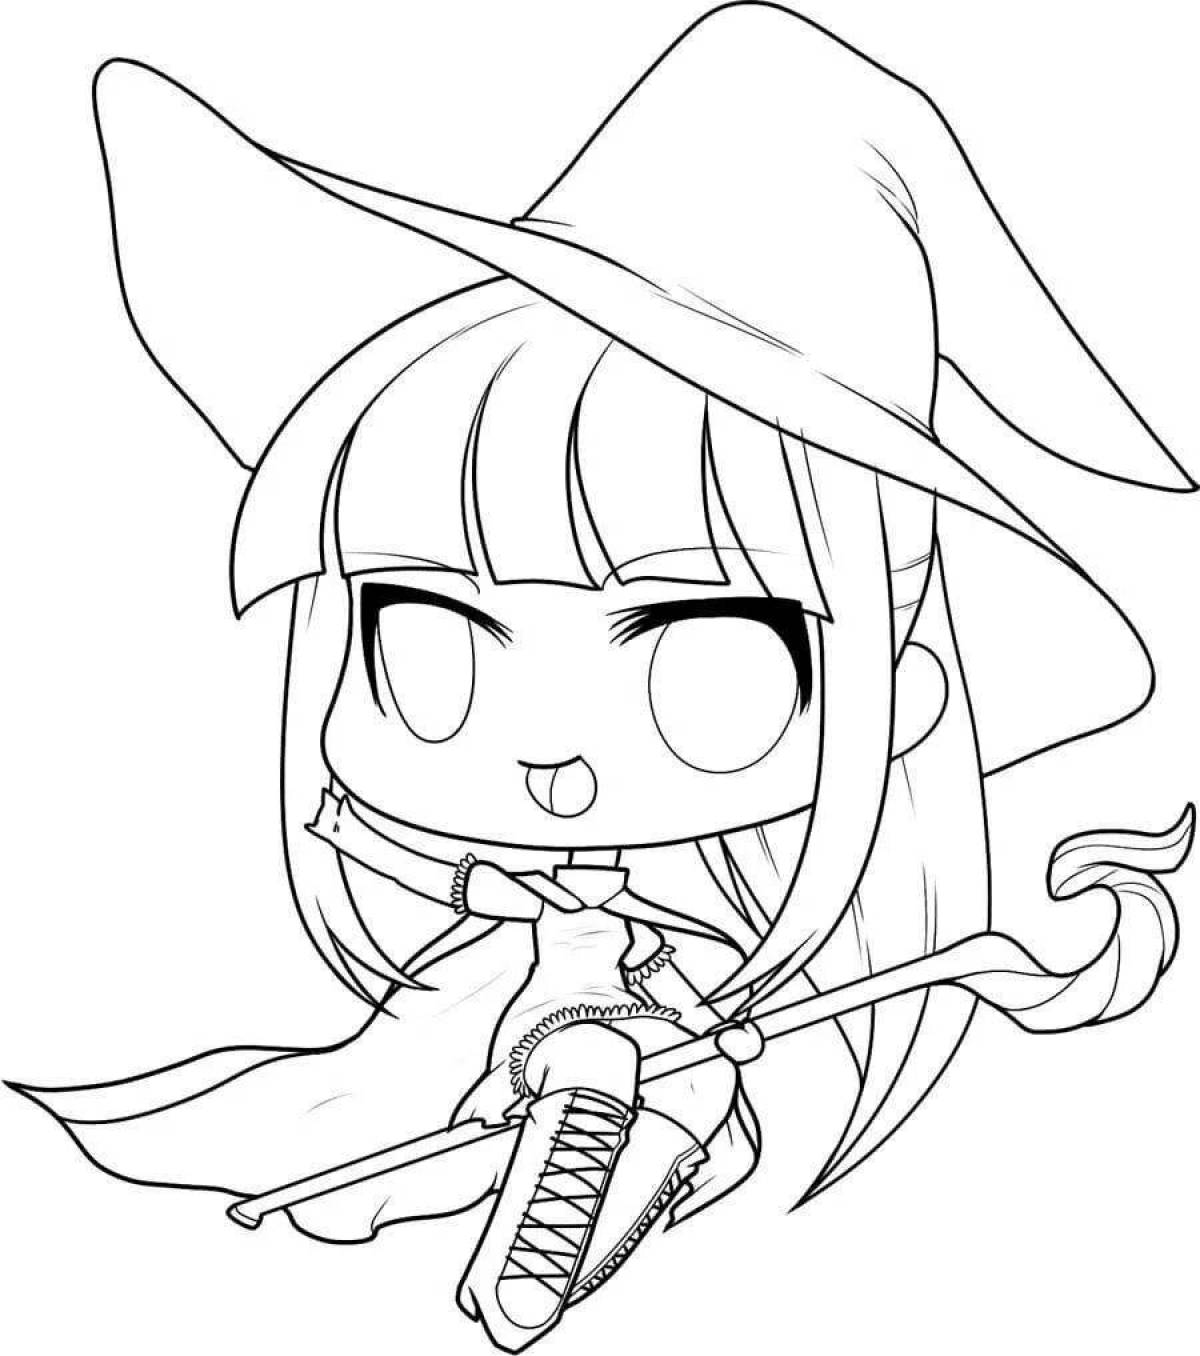 Xiao chibi animated coloring page